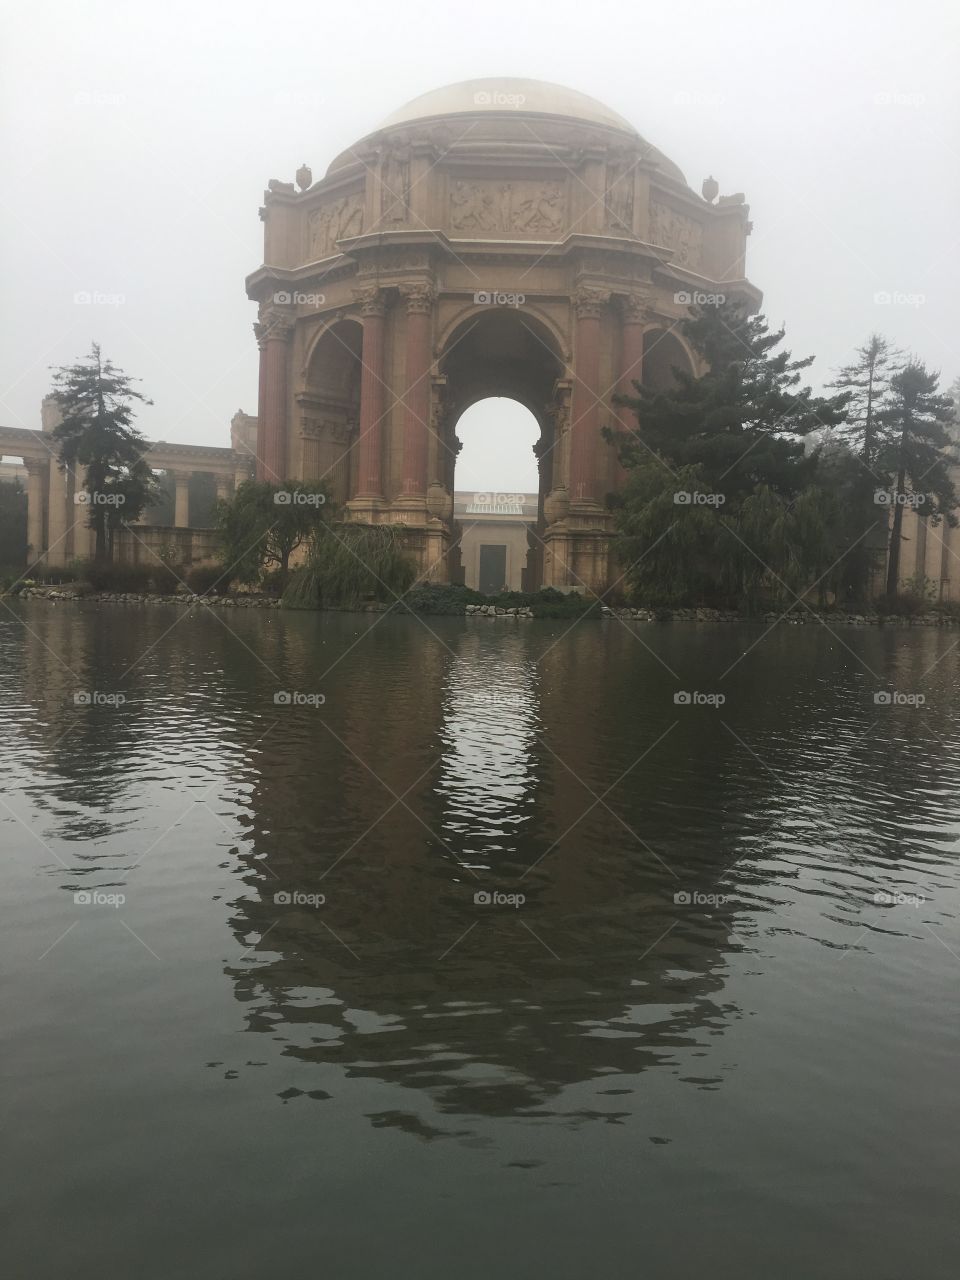 Cool picture of a museum in San Francisco on our bus tour. 